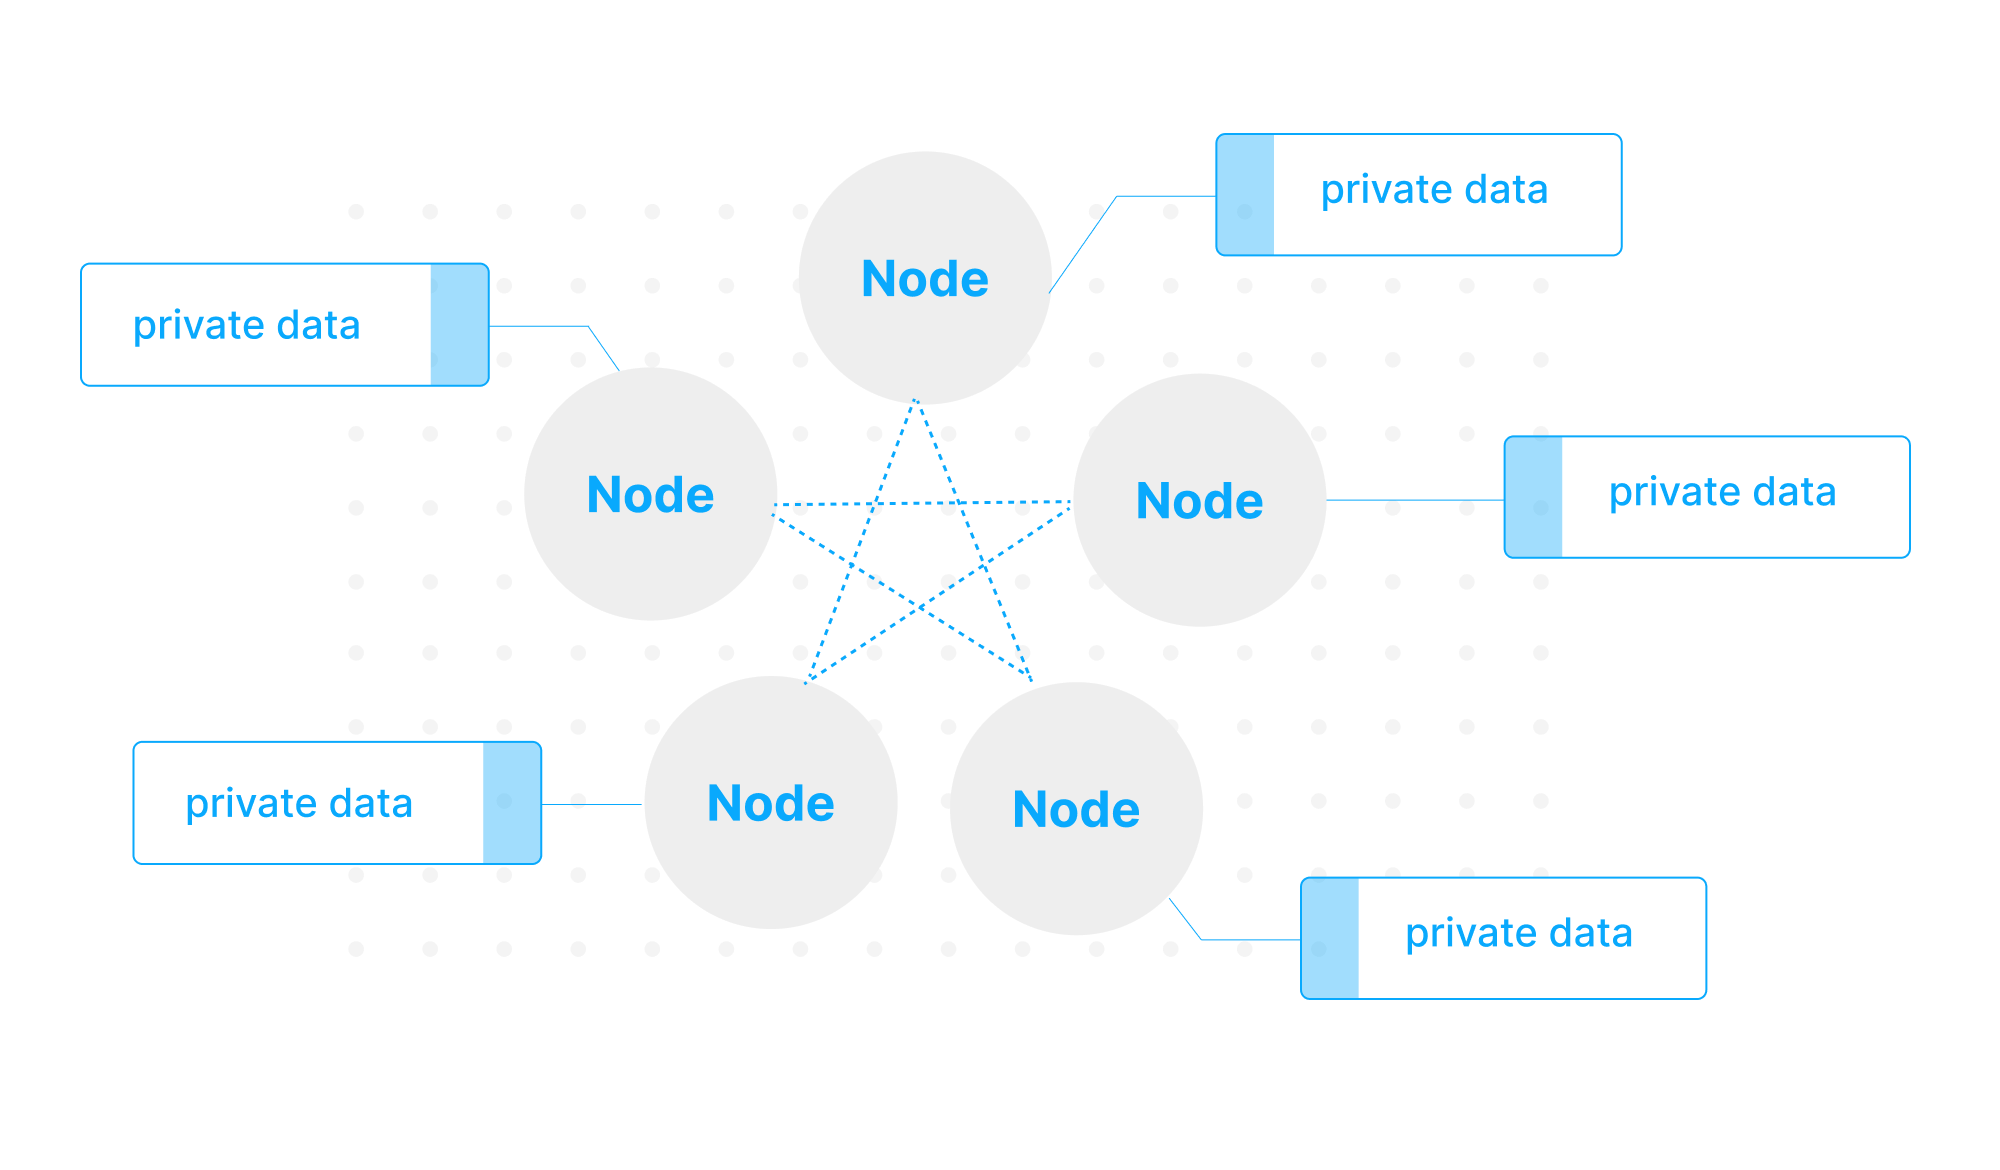 Use case for nodes. Provide private data to the network as datasets at no leakage risk. Decentralized network to join and quit at any time.